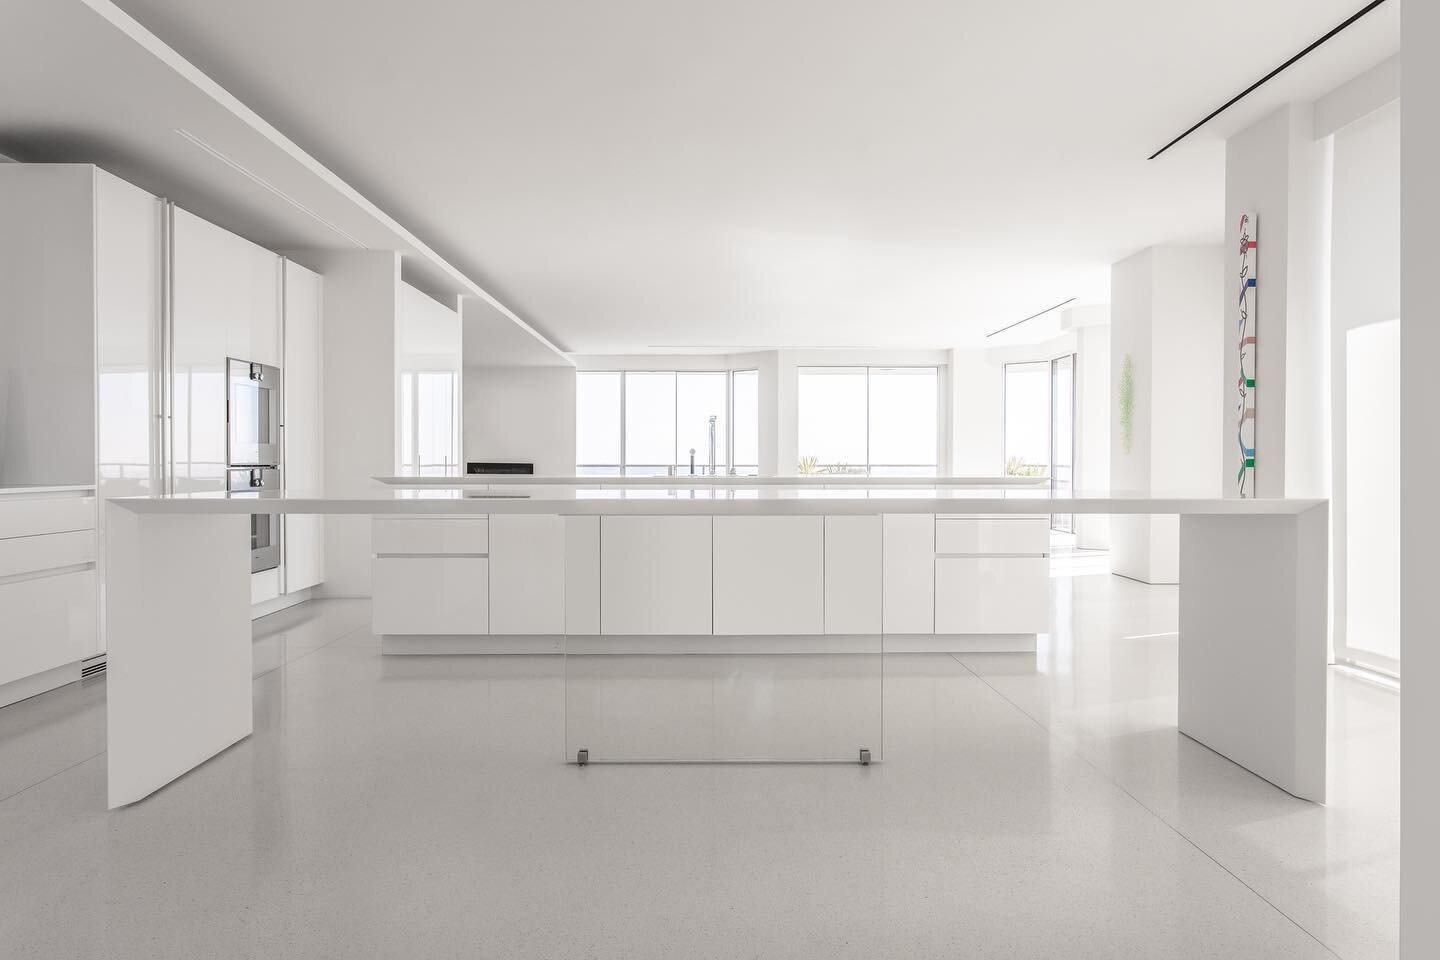 Our White Out penthouse project. A one of a kind collaboration to create this weightless kitchen island. With the help of @silvia_frigerio @boffi_official 
.
.
Built by @modaainc 
Art by @this_means 
Photo by @michaelcliffordphotography 
.
.
.
#minim